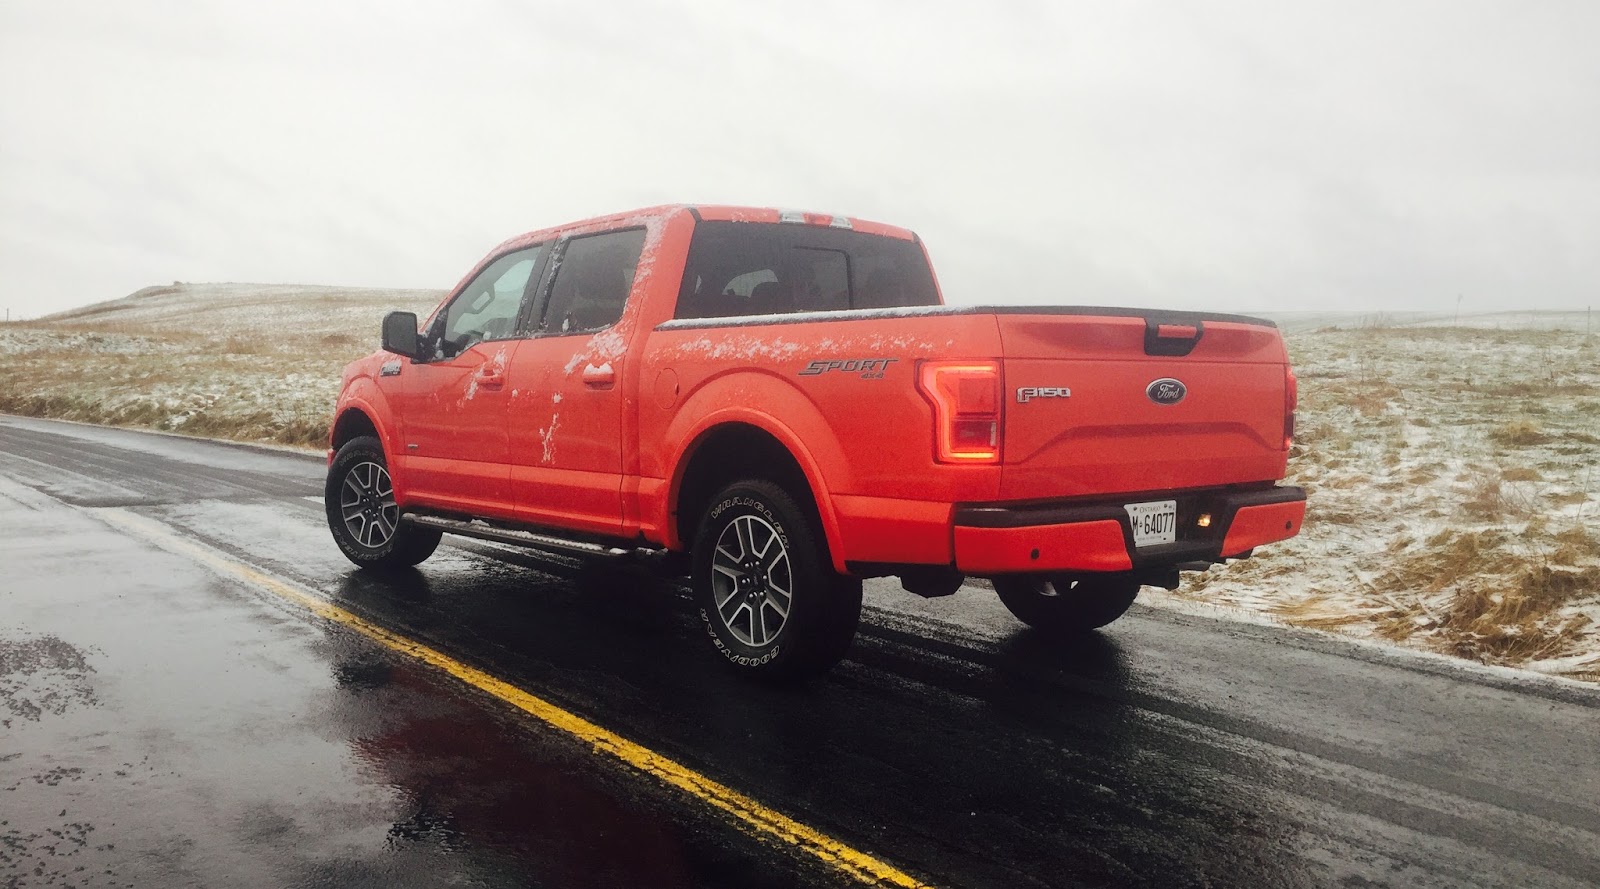 2018 Ford F 150 Xlt Supercrew Towing Capacity 2018 Ford F 150 Xlt V6 Towing Capacity